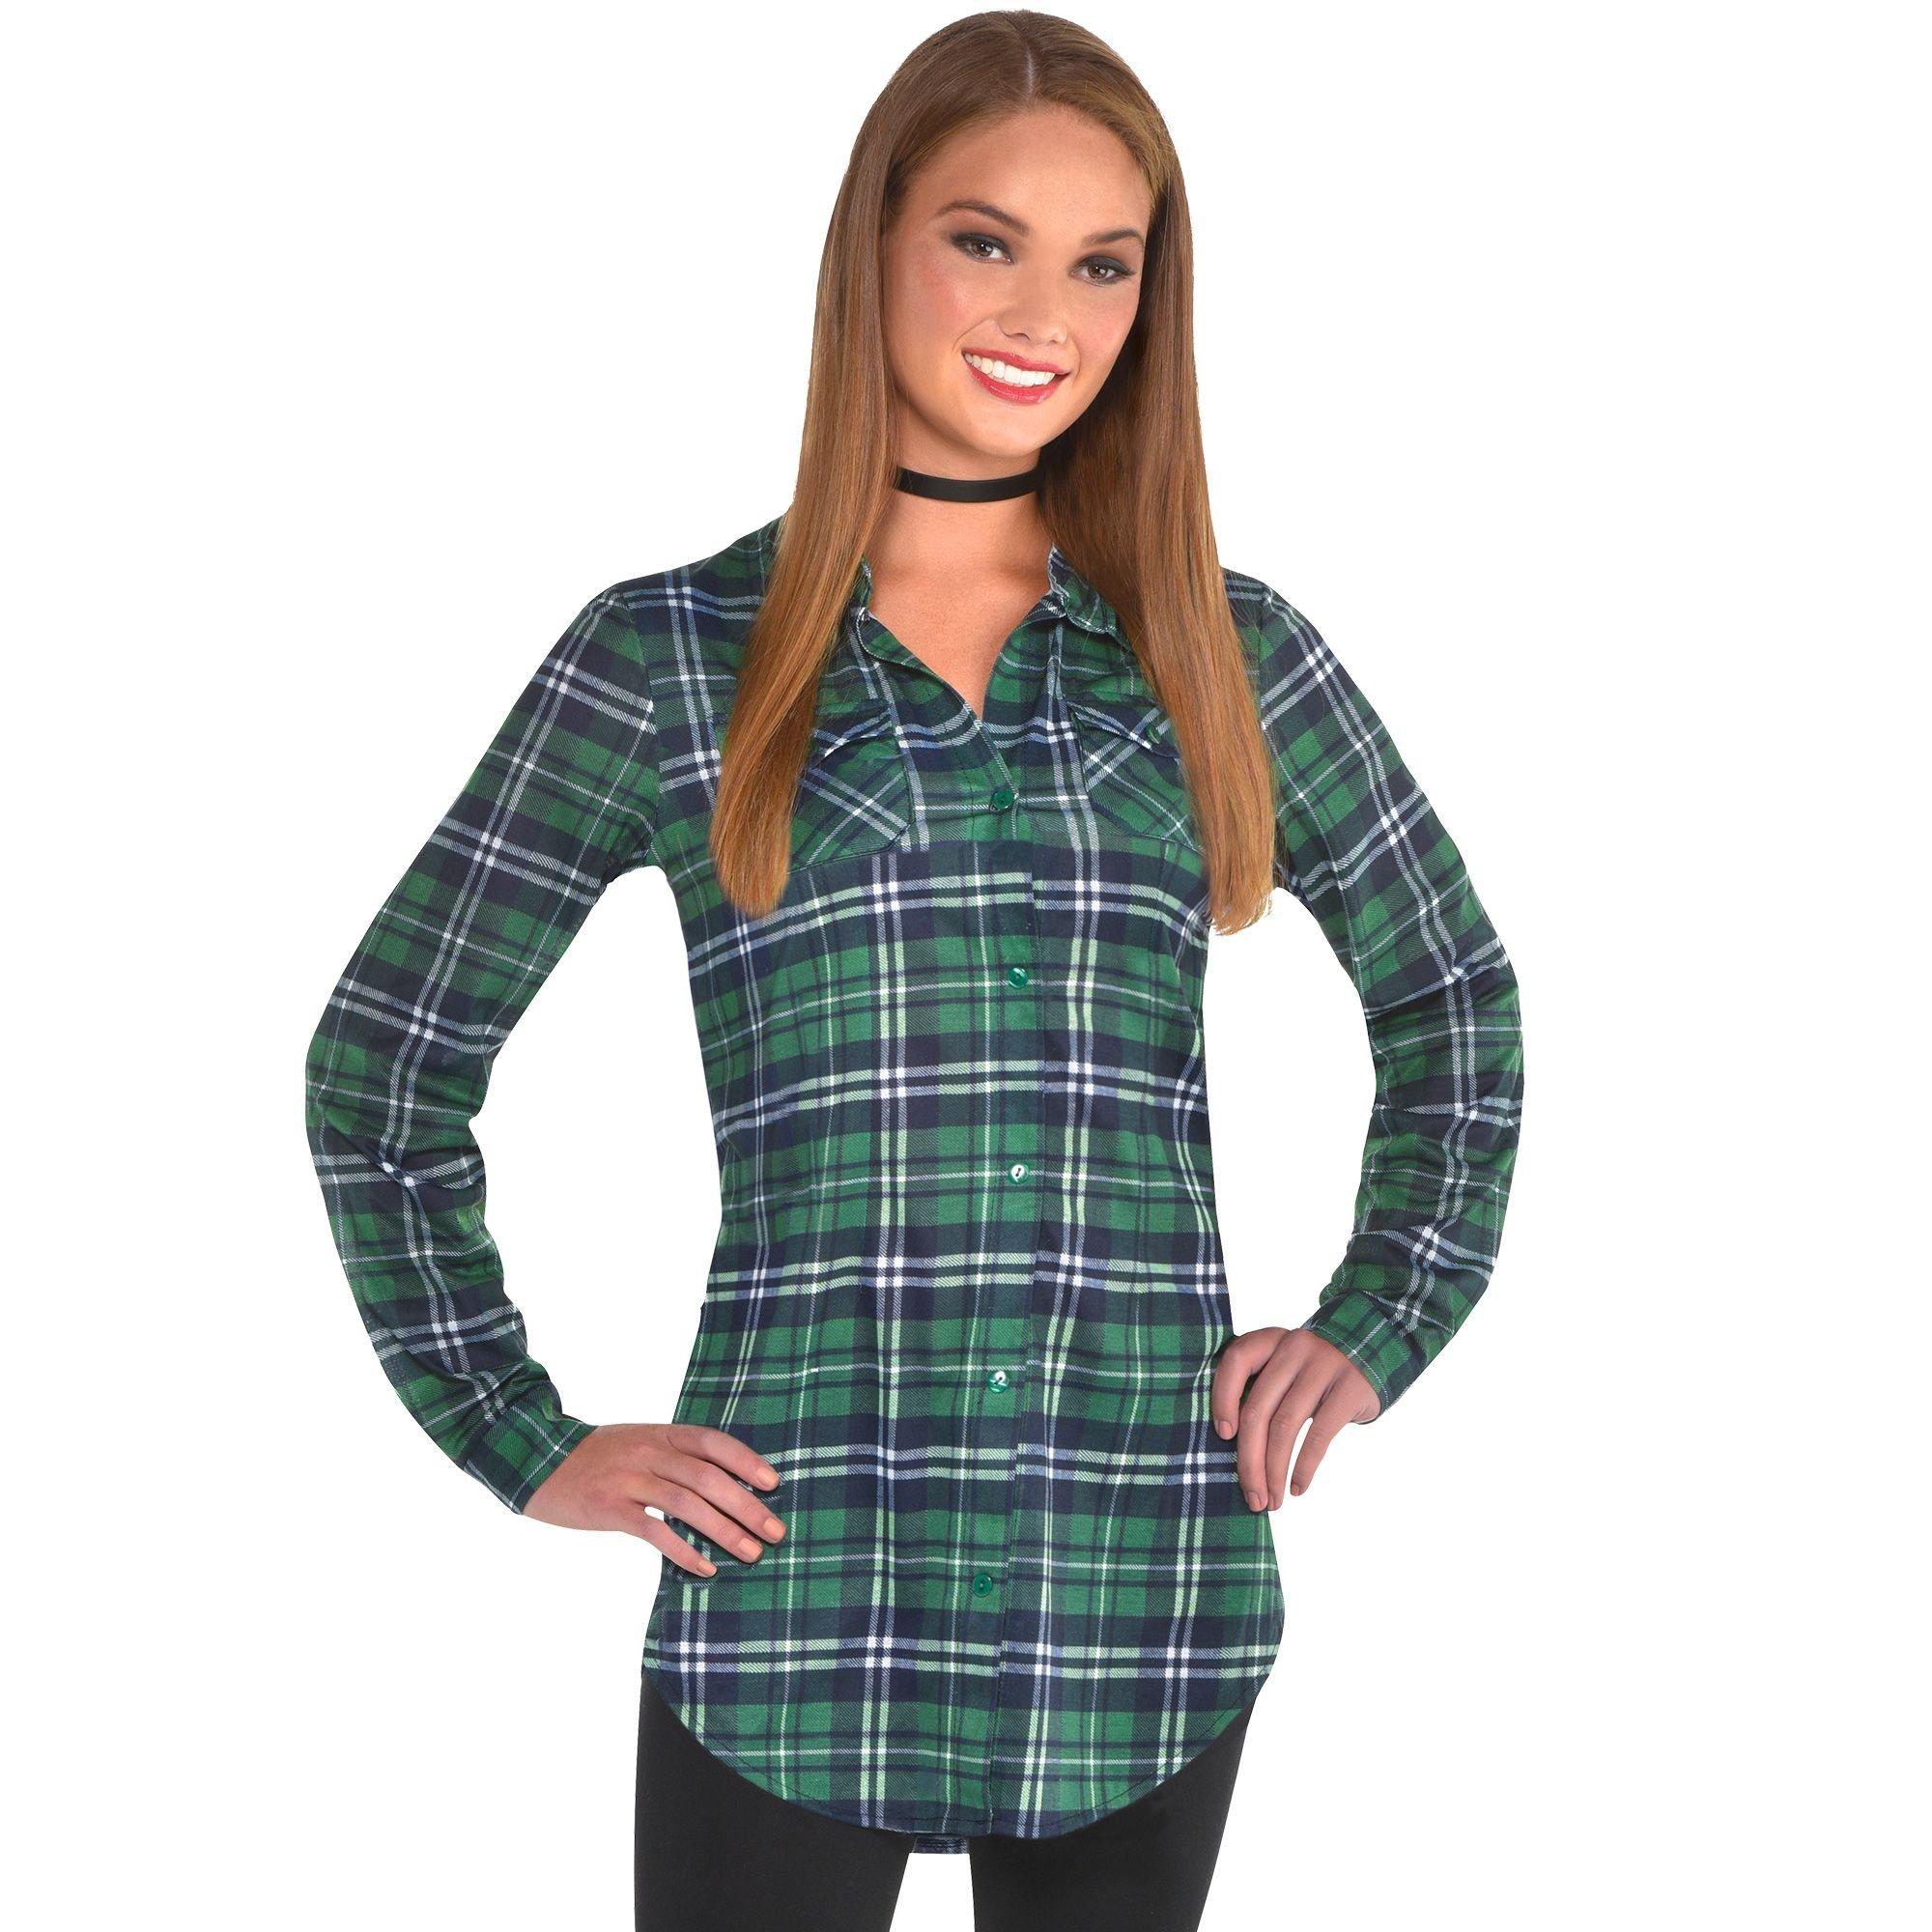 Plaid Jacket Women's St. Patrick's Day Fashion Tops Casual Shirt Leave  Printed Shirt Gentle Fabric Swim Cap Army Green